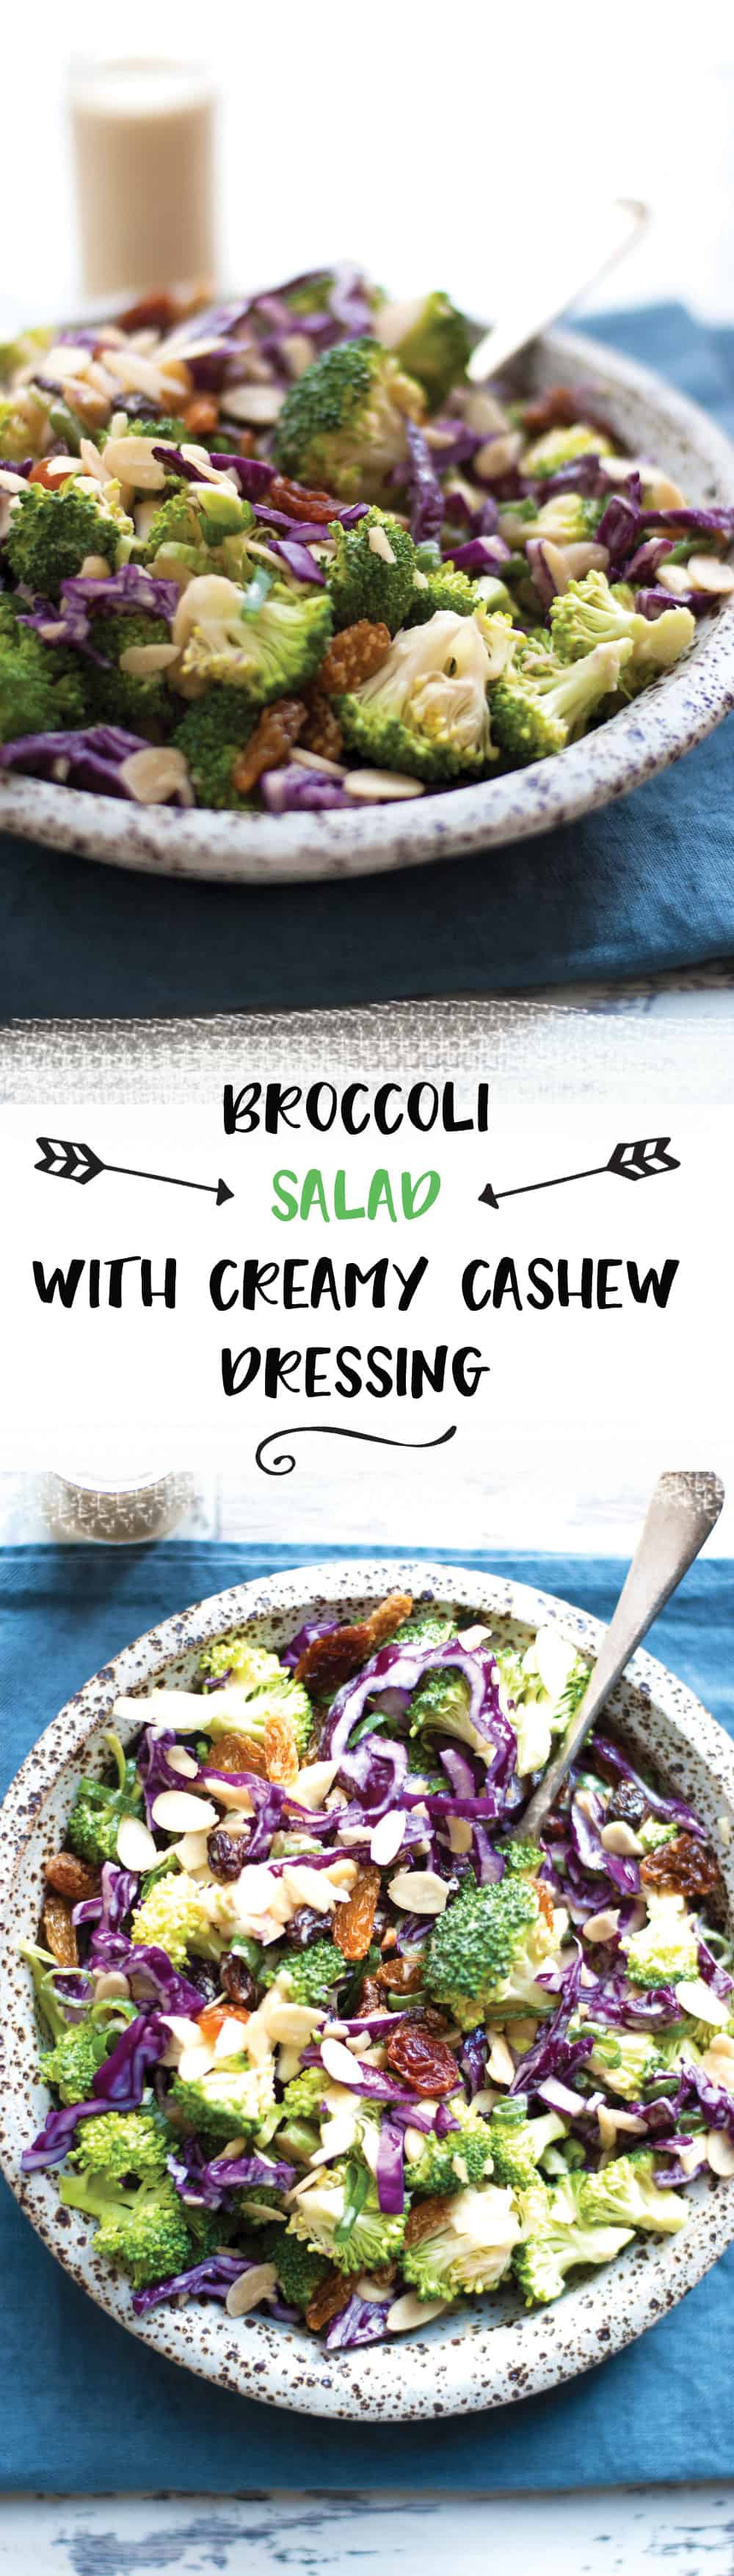 Crunchy broccoli salad with creamy cashew dressing. Quick and easy recipe, packed with all the good stuff! | via @annabanana.co